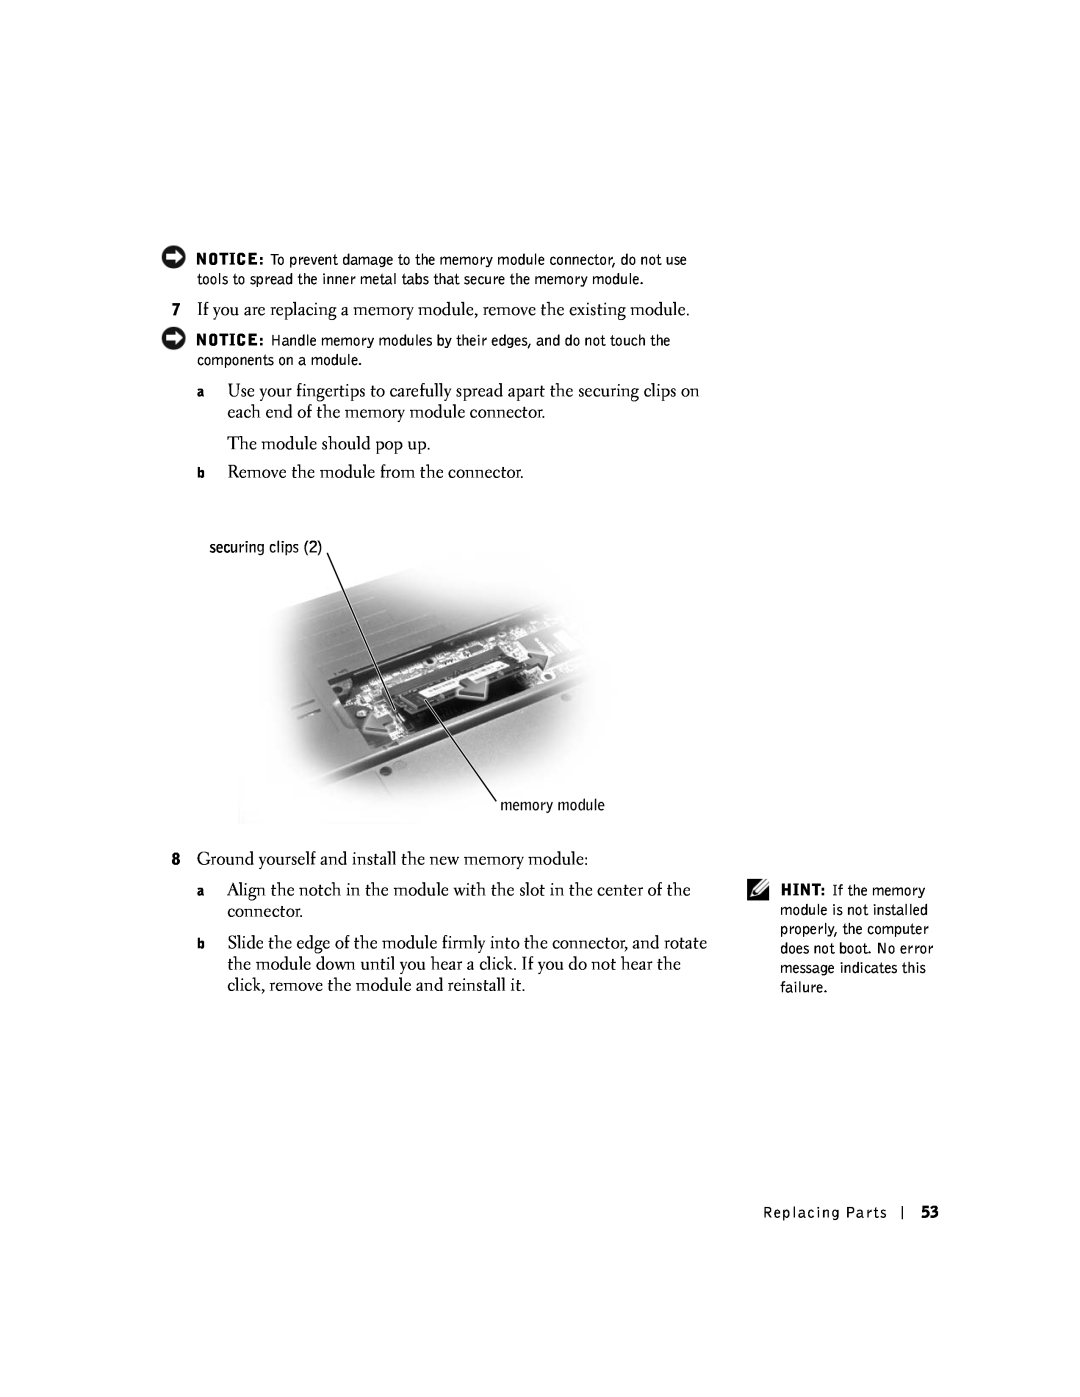 Dell 100N owner manual If you are replacing a memory module, remove the existing module 